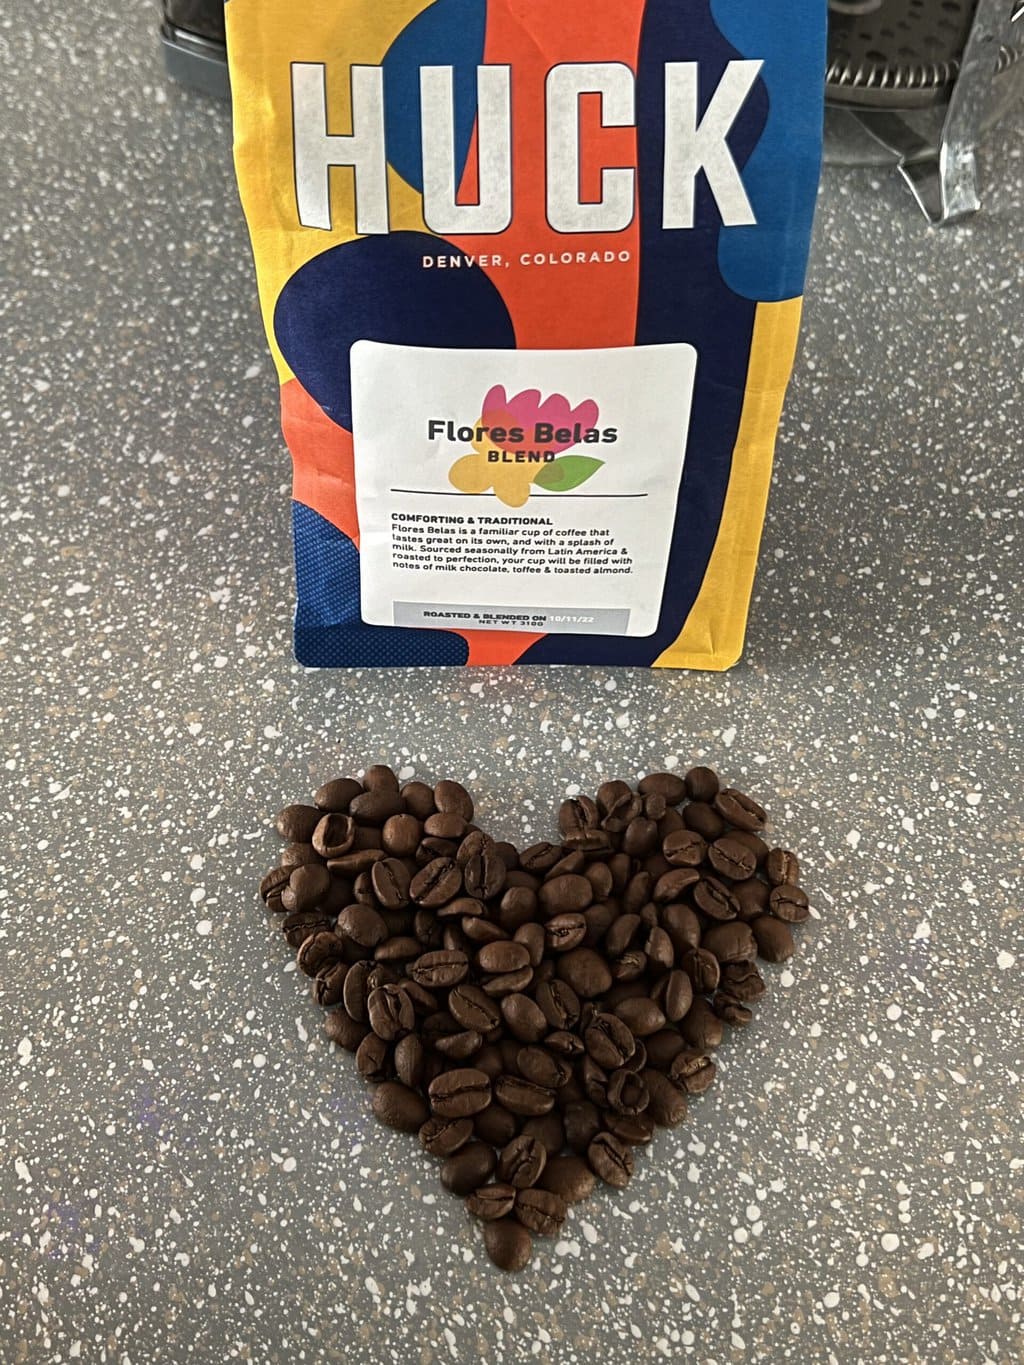 Heart shaped coffee beans next to a pack of Huck Coffee